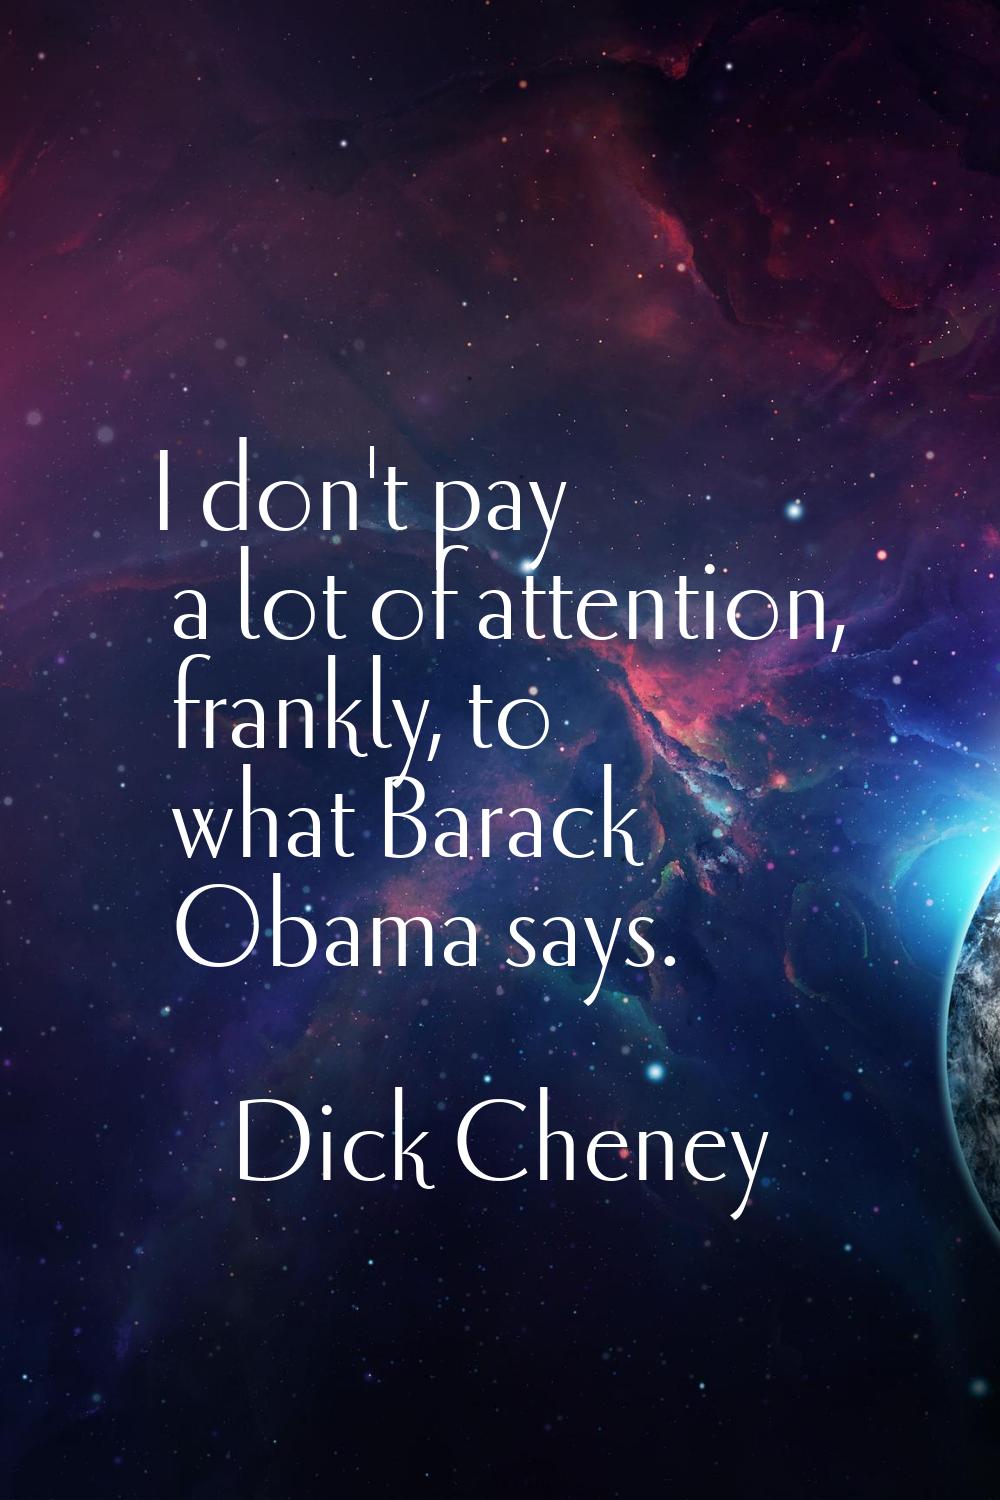 I don't pay a lot of attention, frankly, to what Barack Obama says.